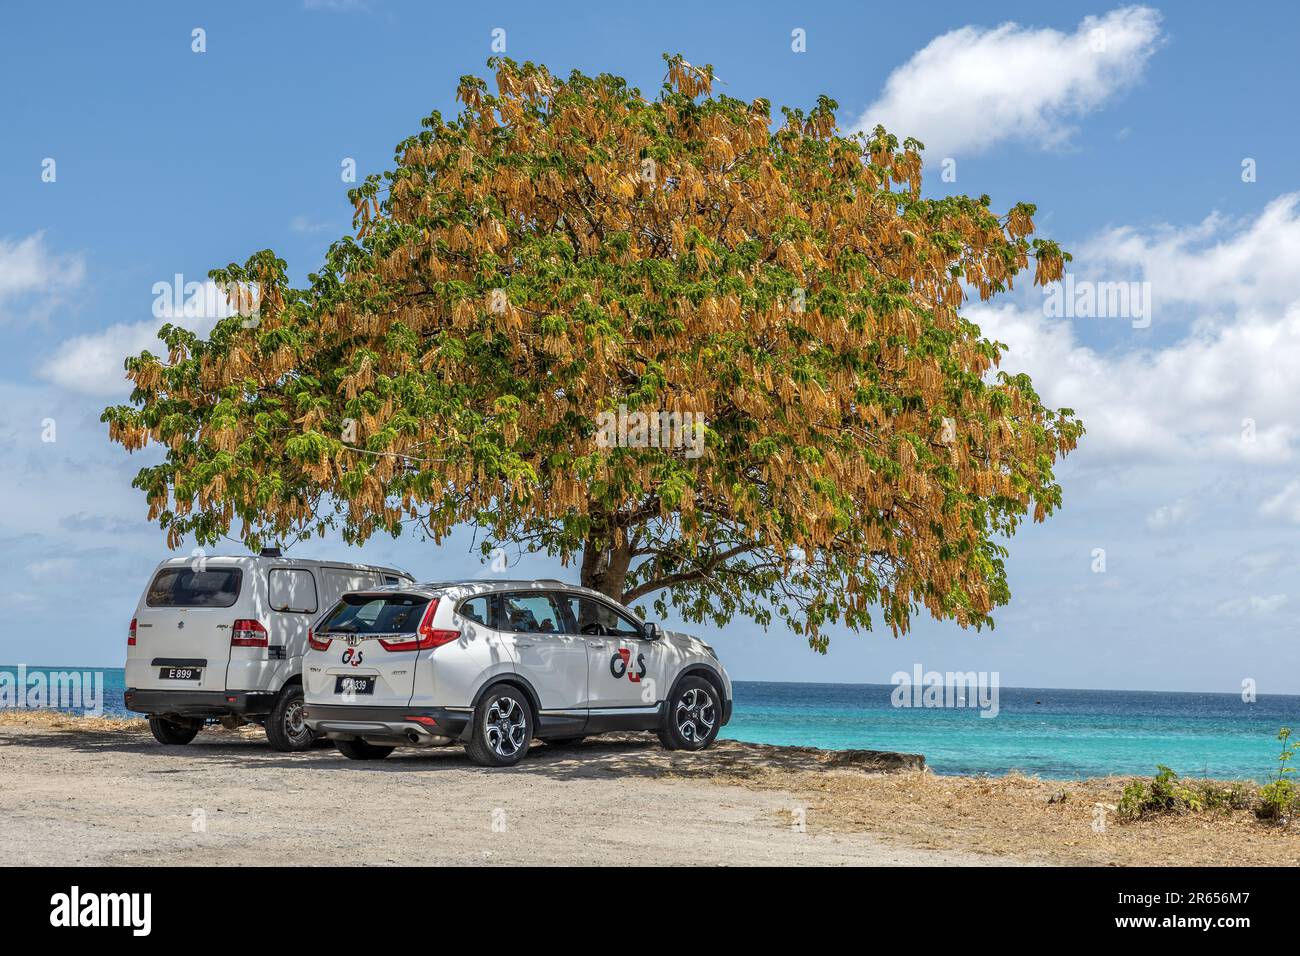 Albizia lebbeck, locally known as 'Shak Shak Tree' due to sound of the seeds in the pods, used for shade by parked vehicles, Oistins, Barbados Stock Photo